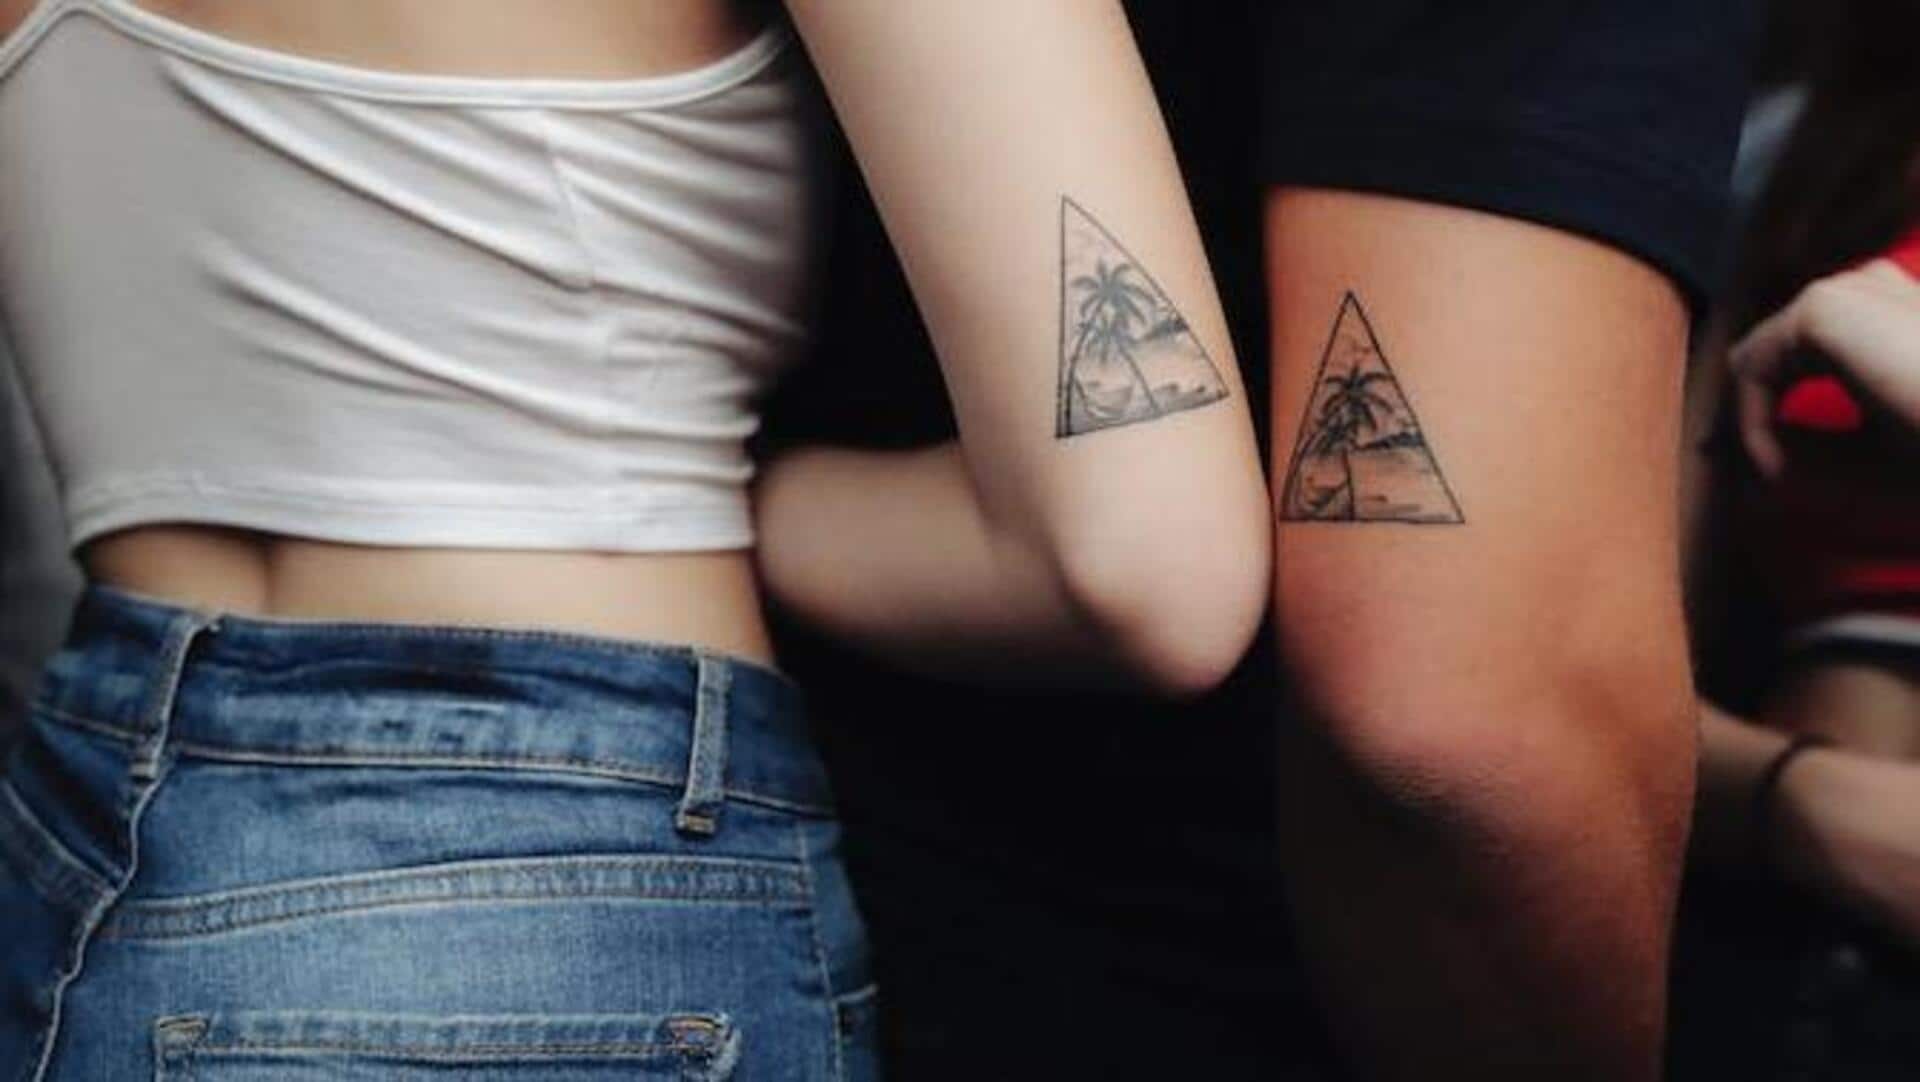 Matching Tattoos by Visual Jams on Dribbble